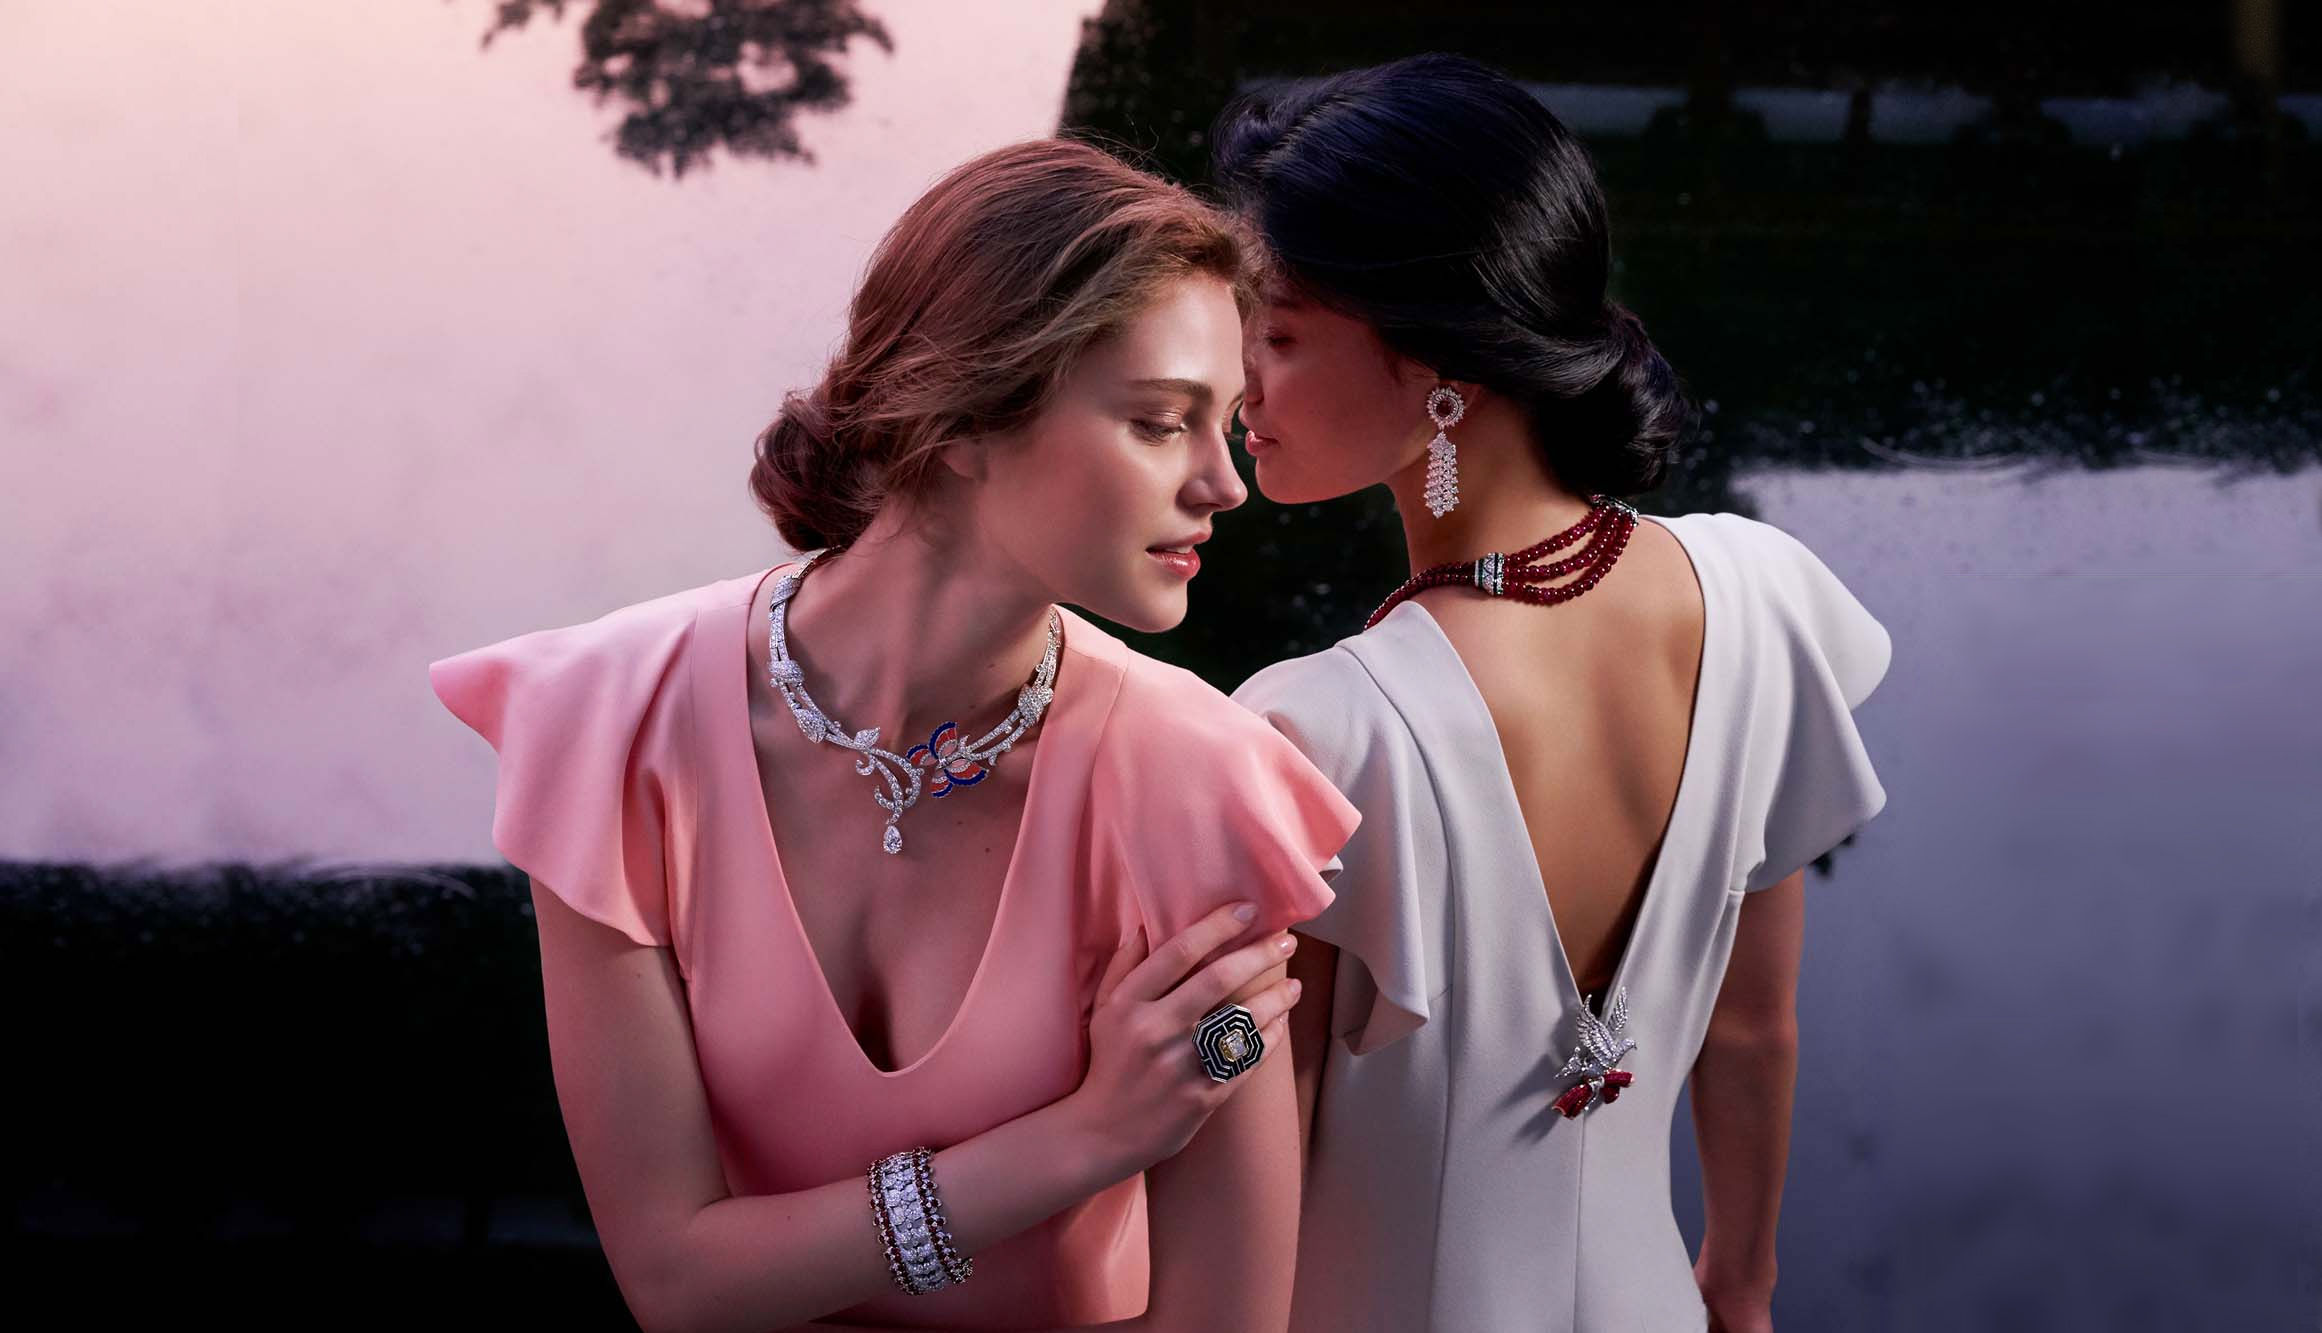 What Is Van Cleef & Arpels And Why Do Celebs Love This Jewelry Brand?